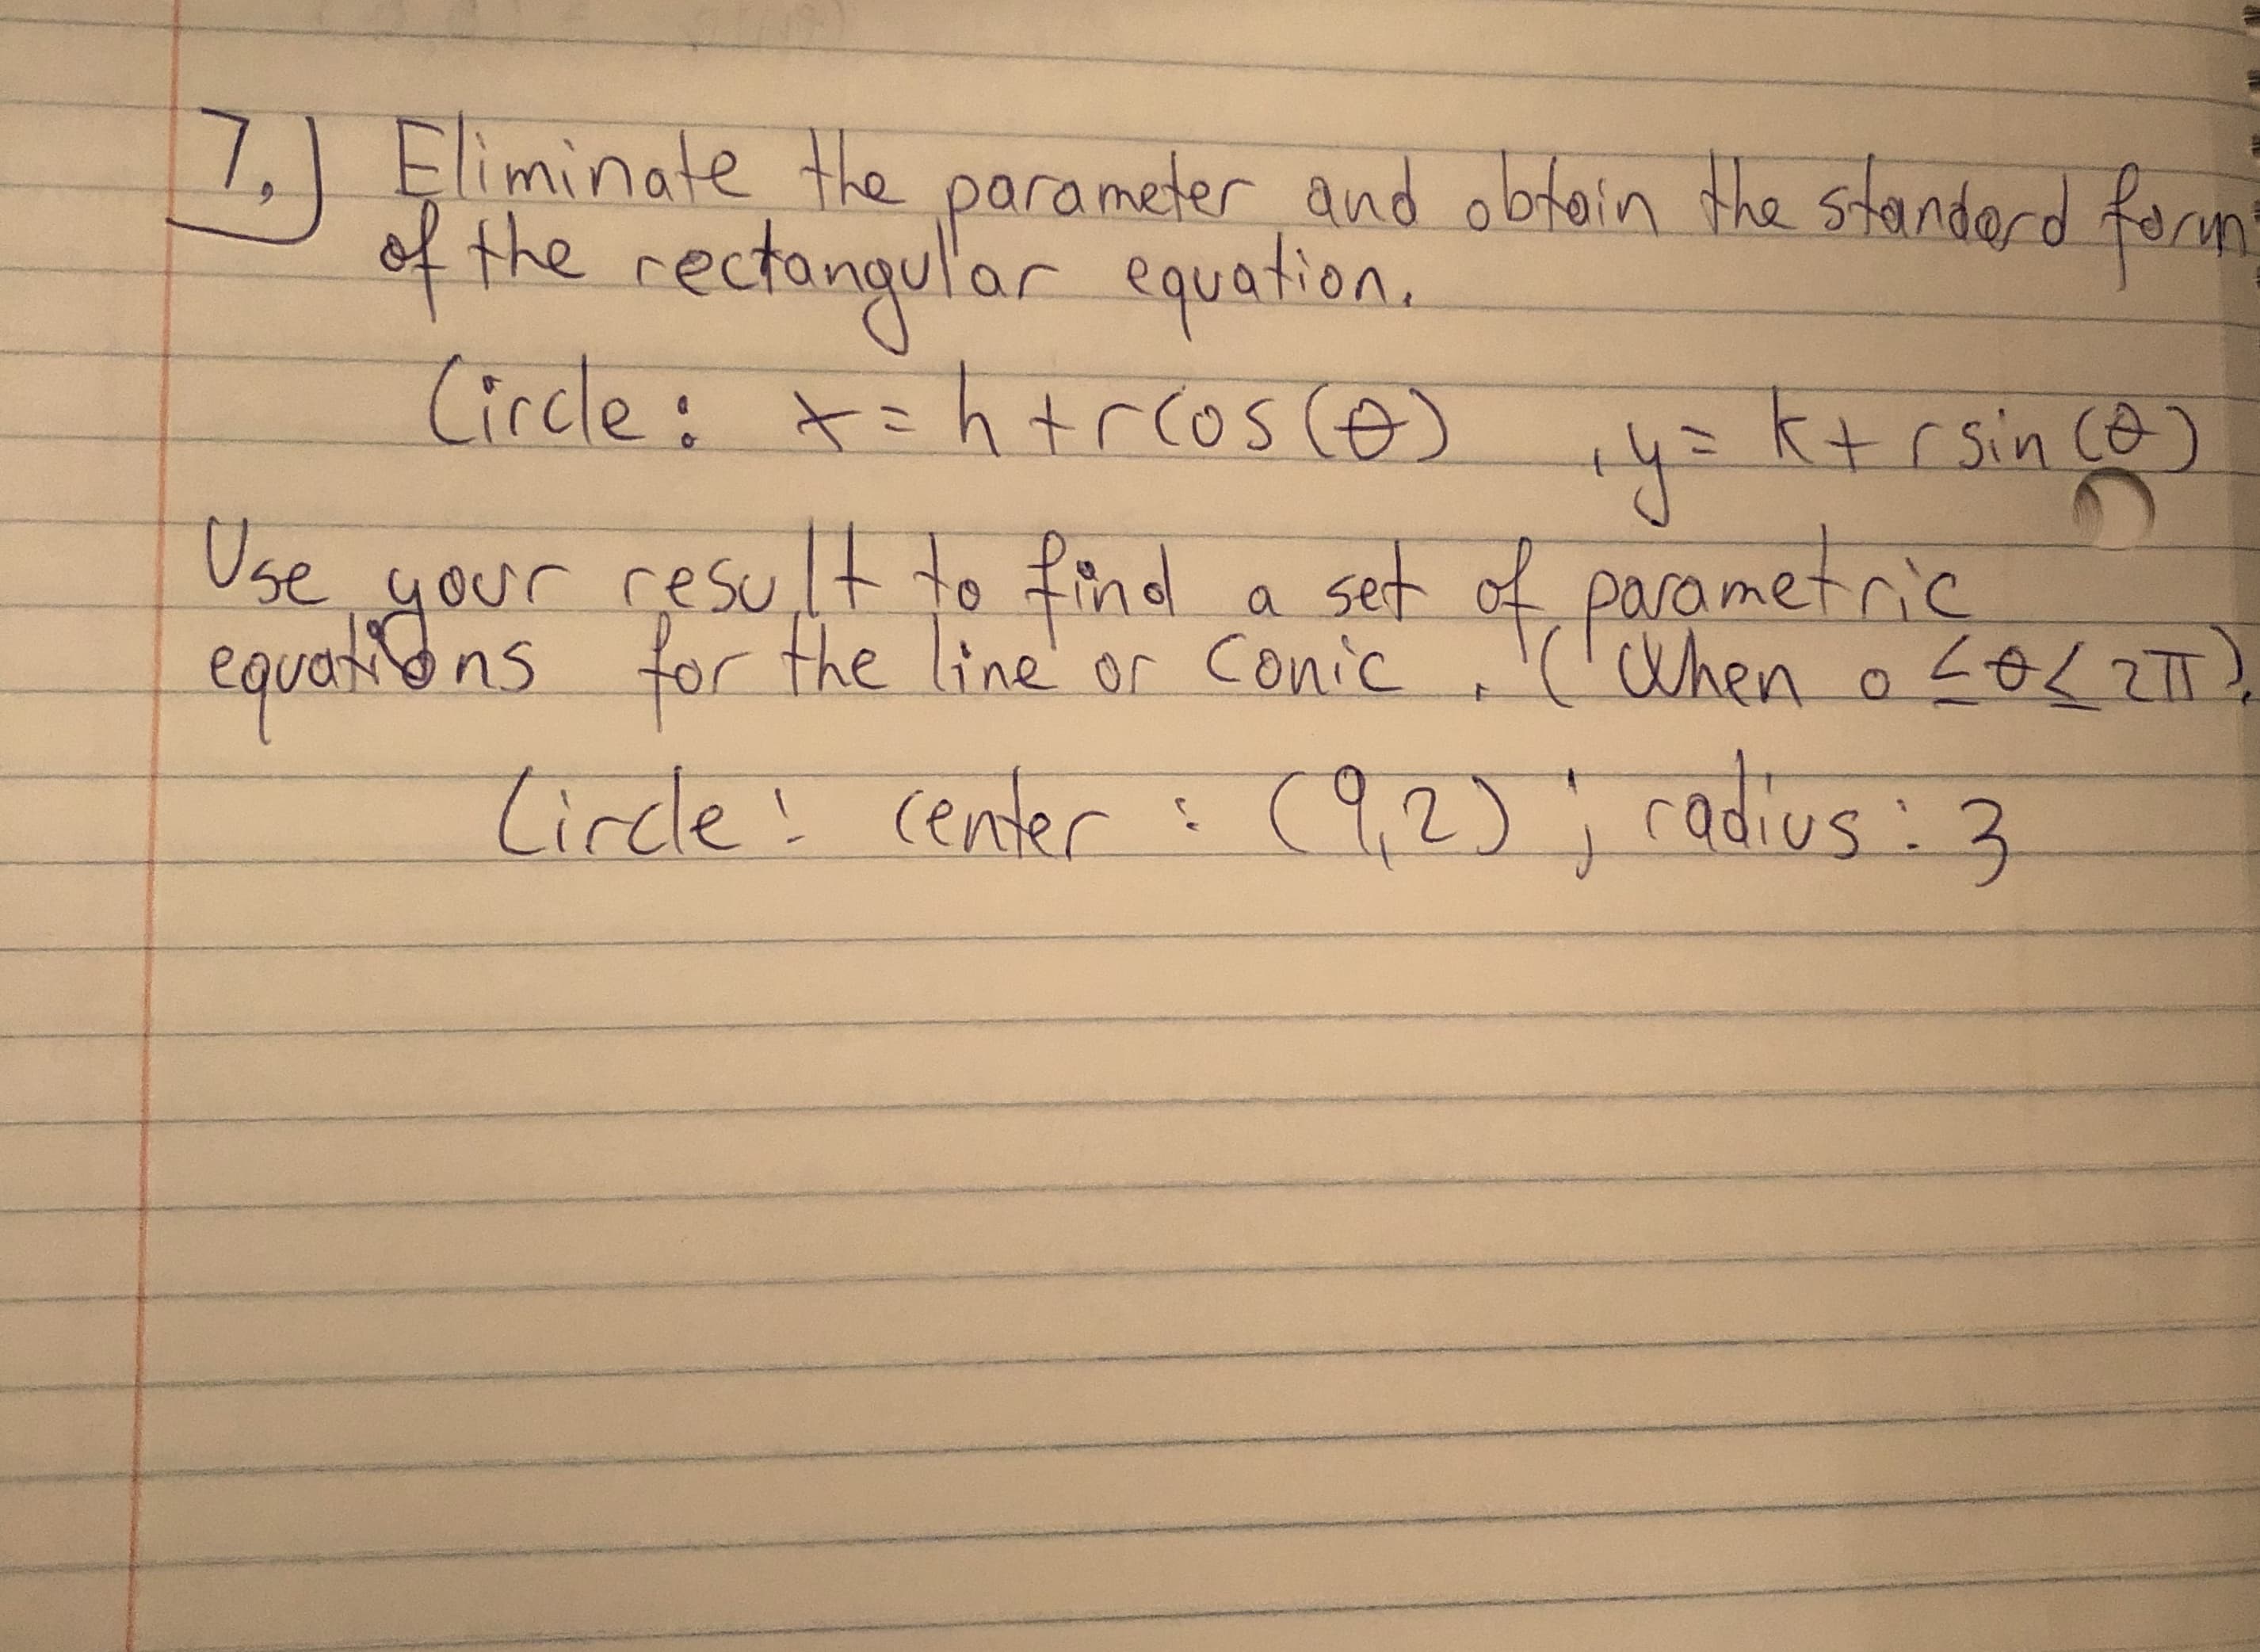 Eliminate the parameter and obtoin the standerd formt
7,)
of the rectongular equation.
Circle: t=htrcos ce)
ktrsin co)
Use
your result to
equatons for the line or Conic
set of
parametric
a
('When
o <0L2TT)
tircdle! center ?
(9,2): radius :3
